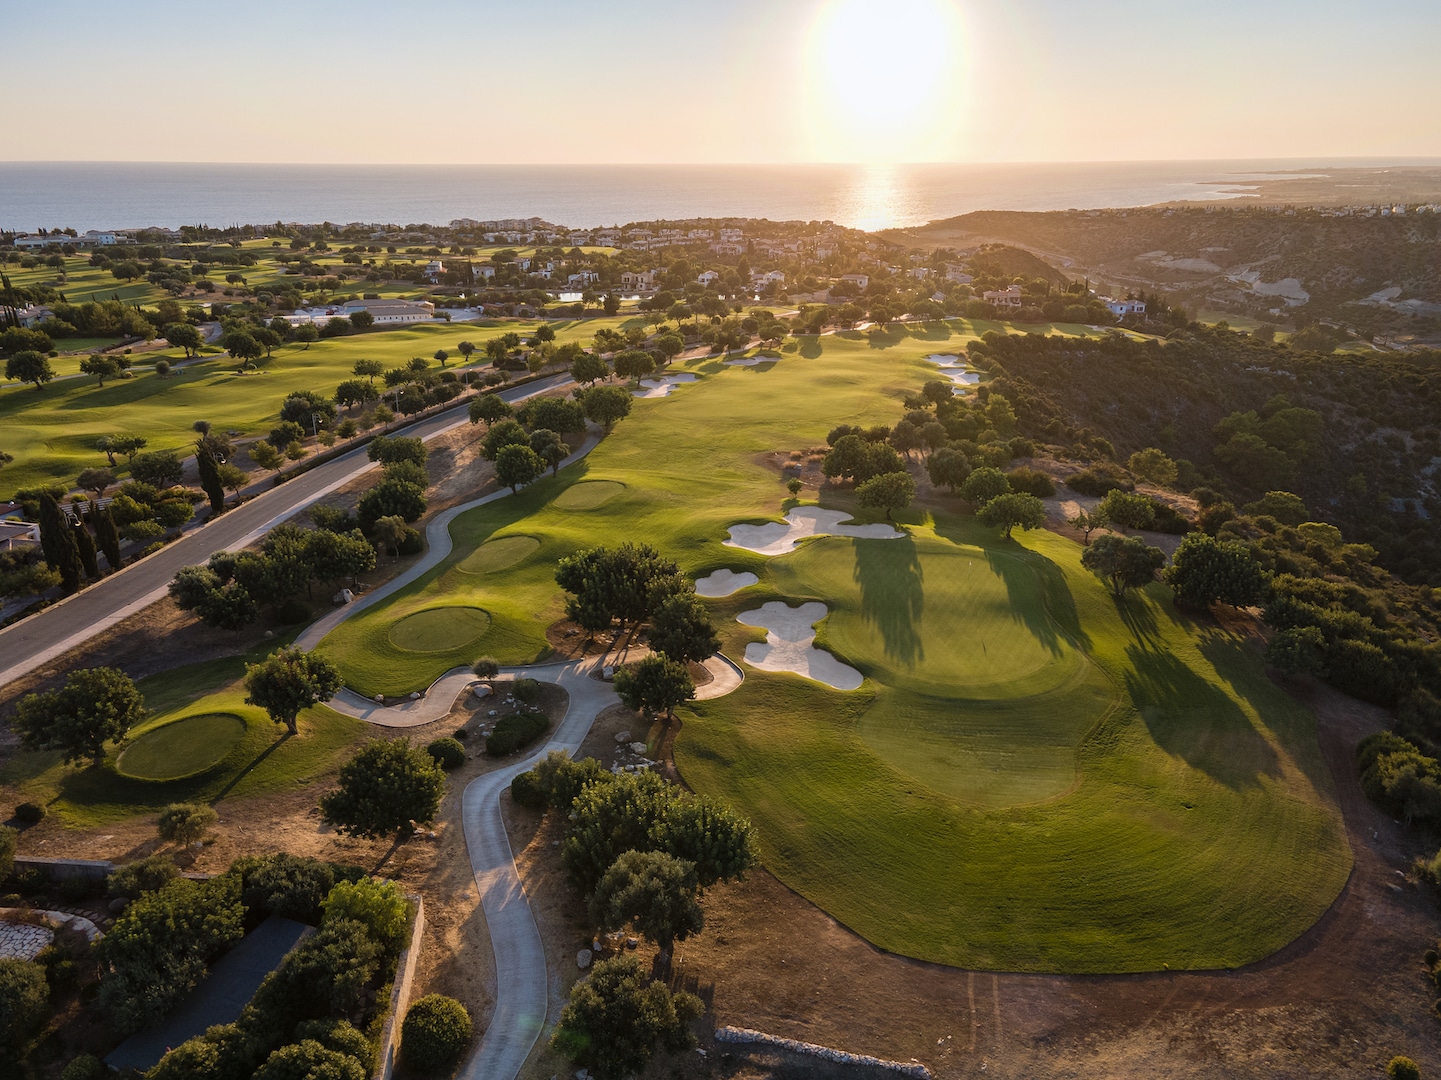 image Cyprus tourism to benefit from stronger golf product in coming years